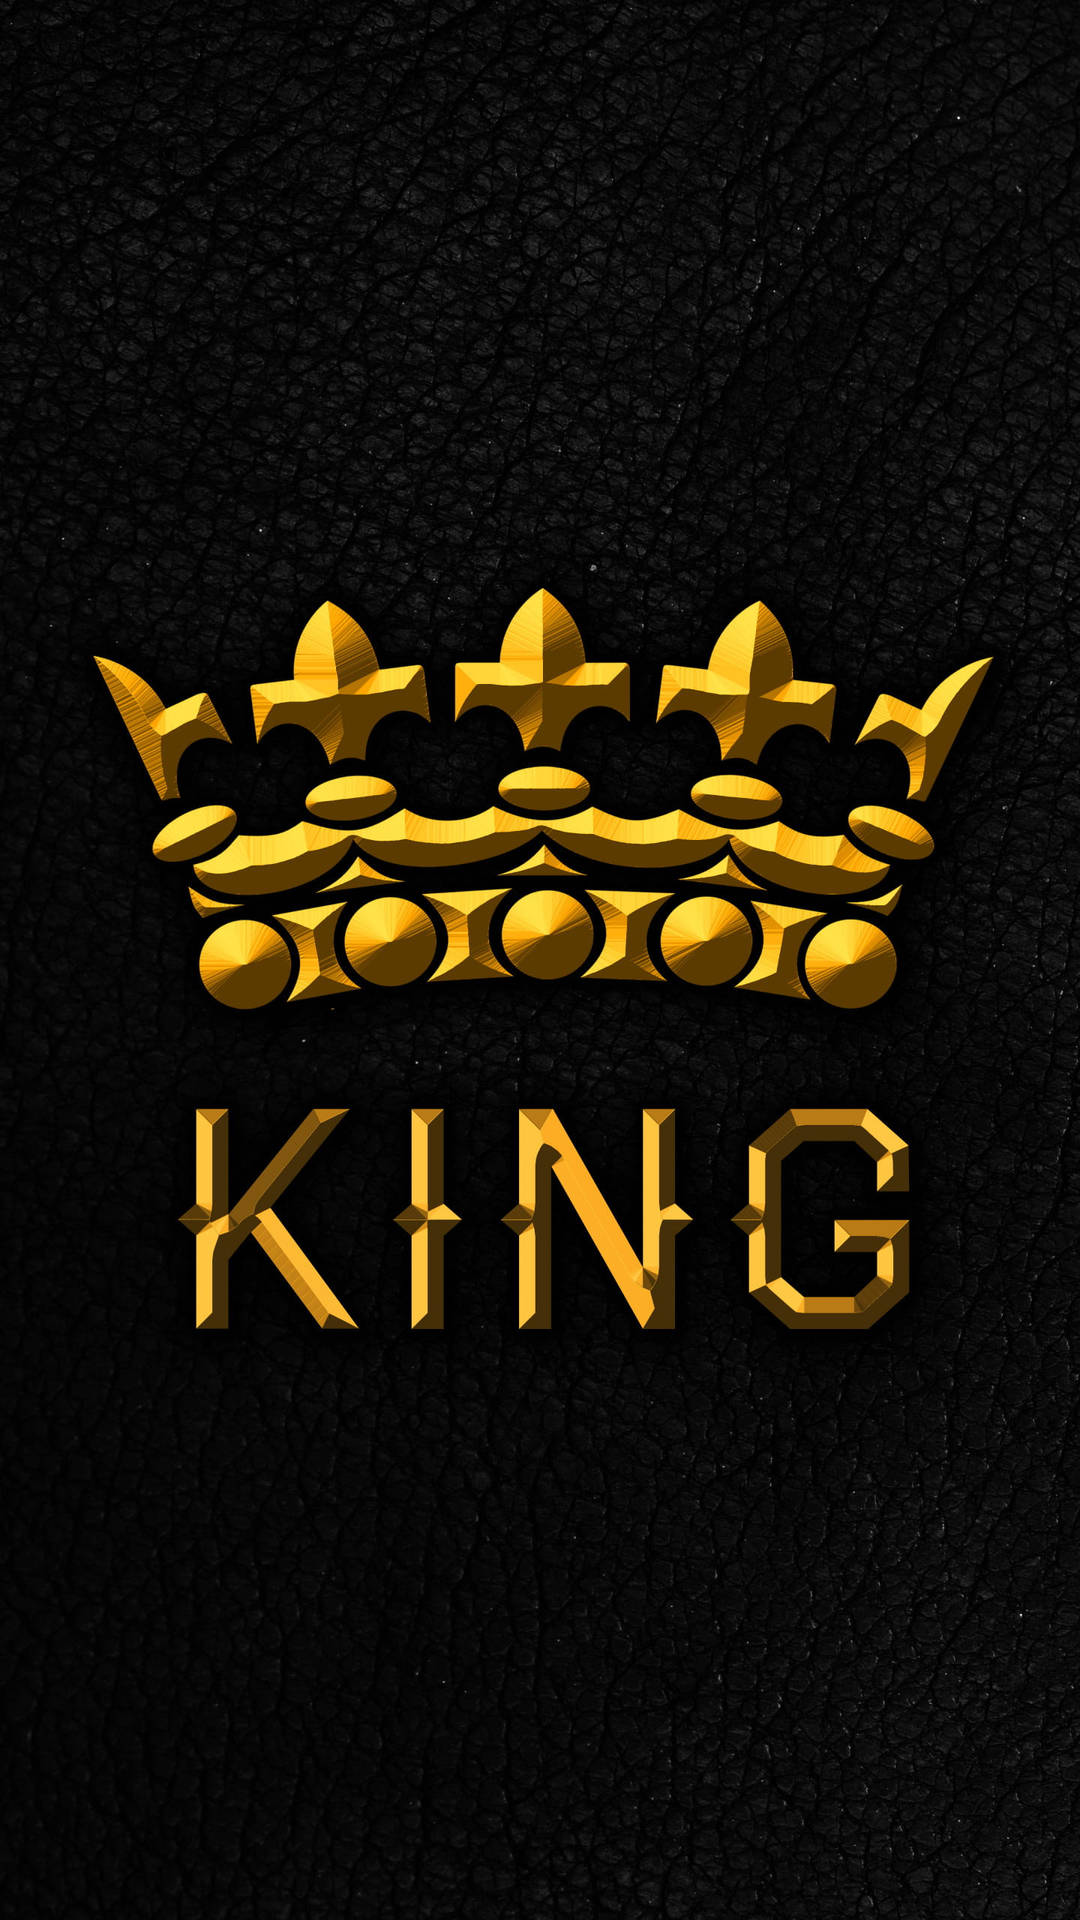 Black And Gold King Iphone Wallpaper